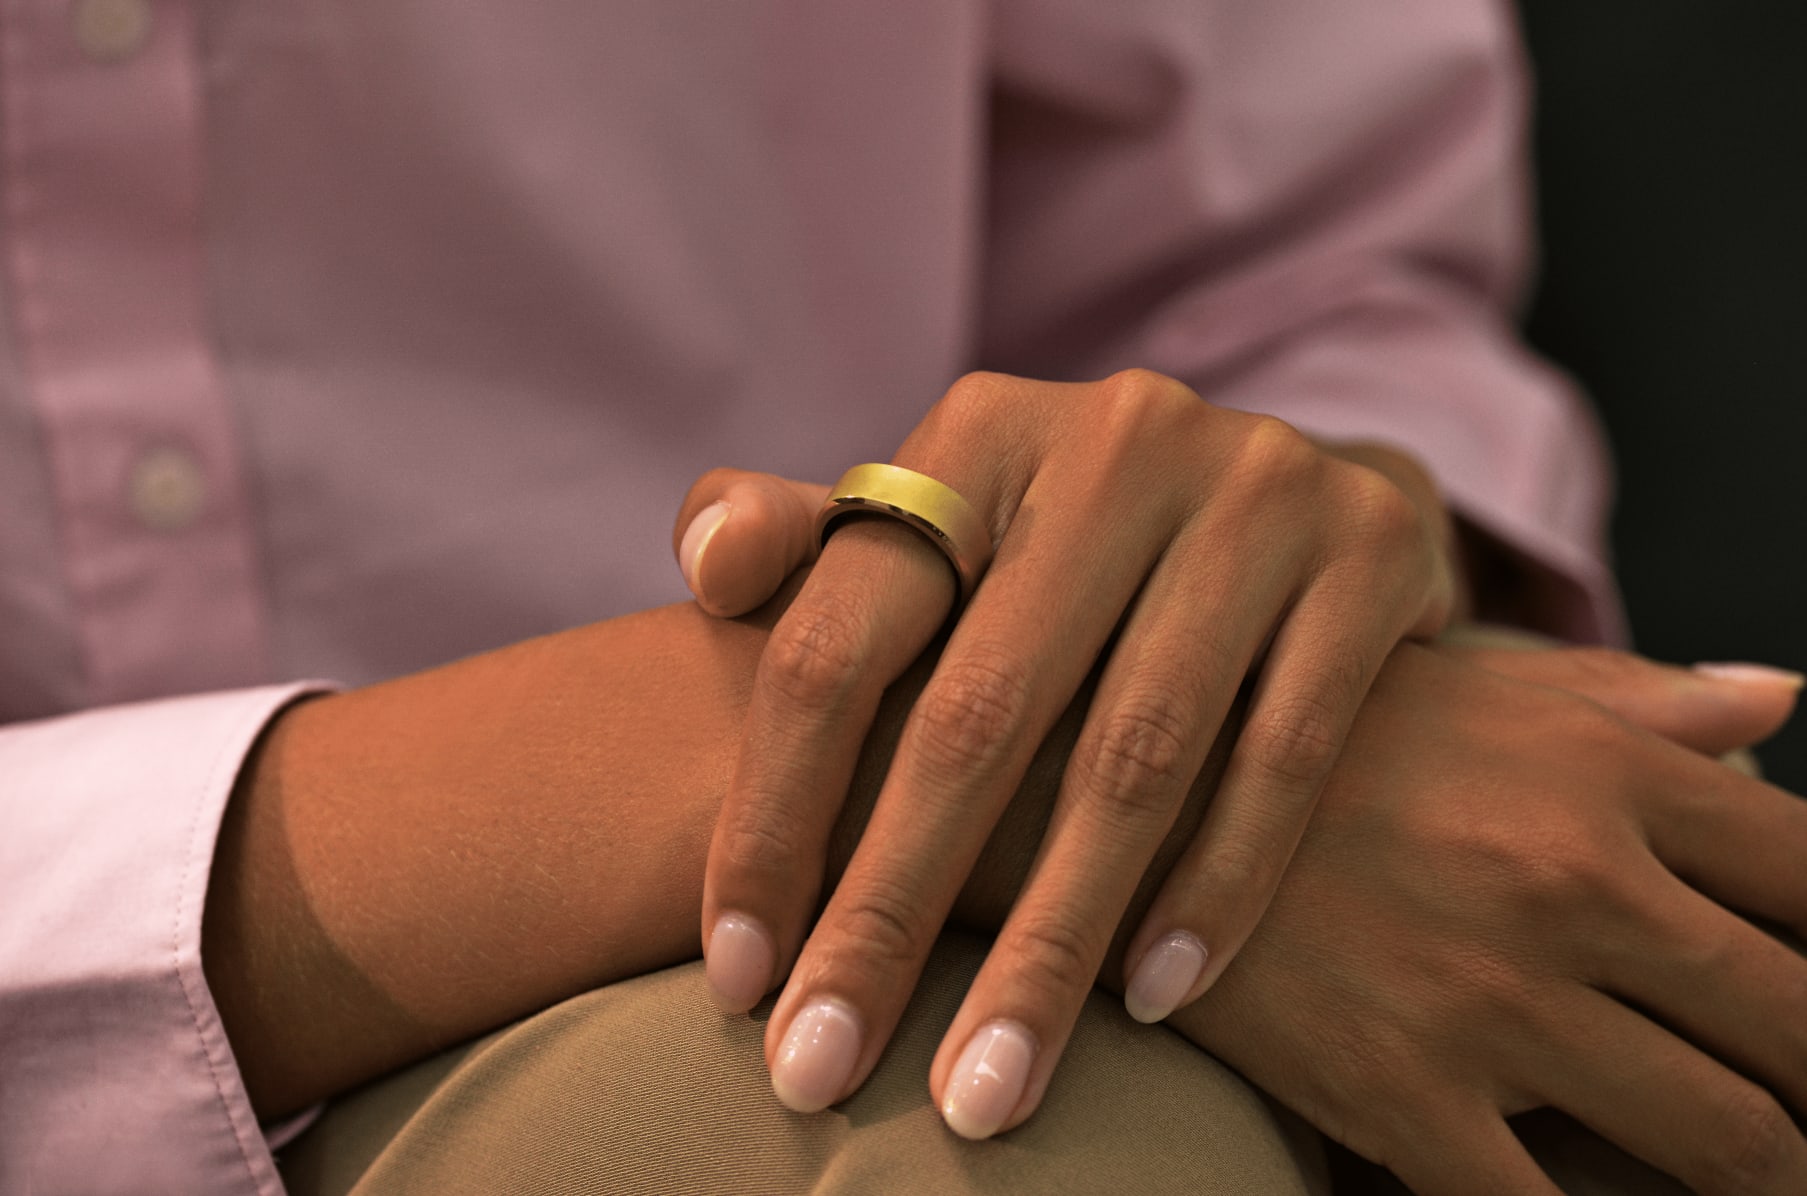 RingConn Launches Crowdfunding Campaign For Innovative Smart  Health-Tracking Ring